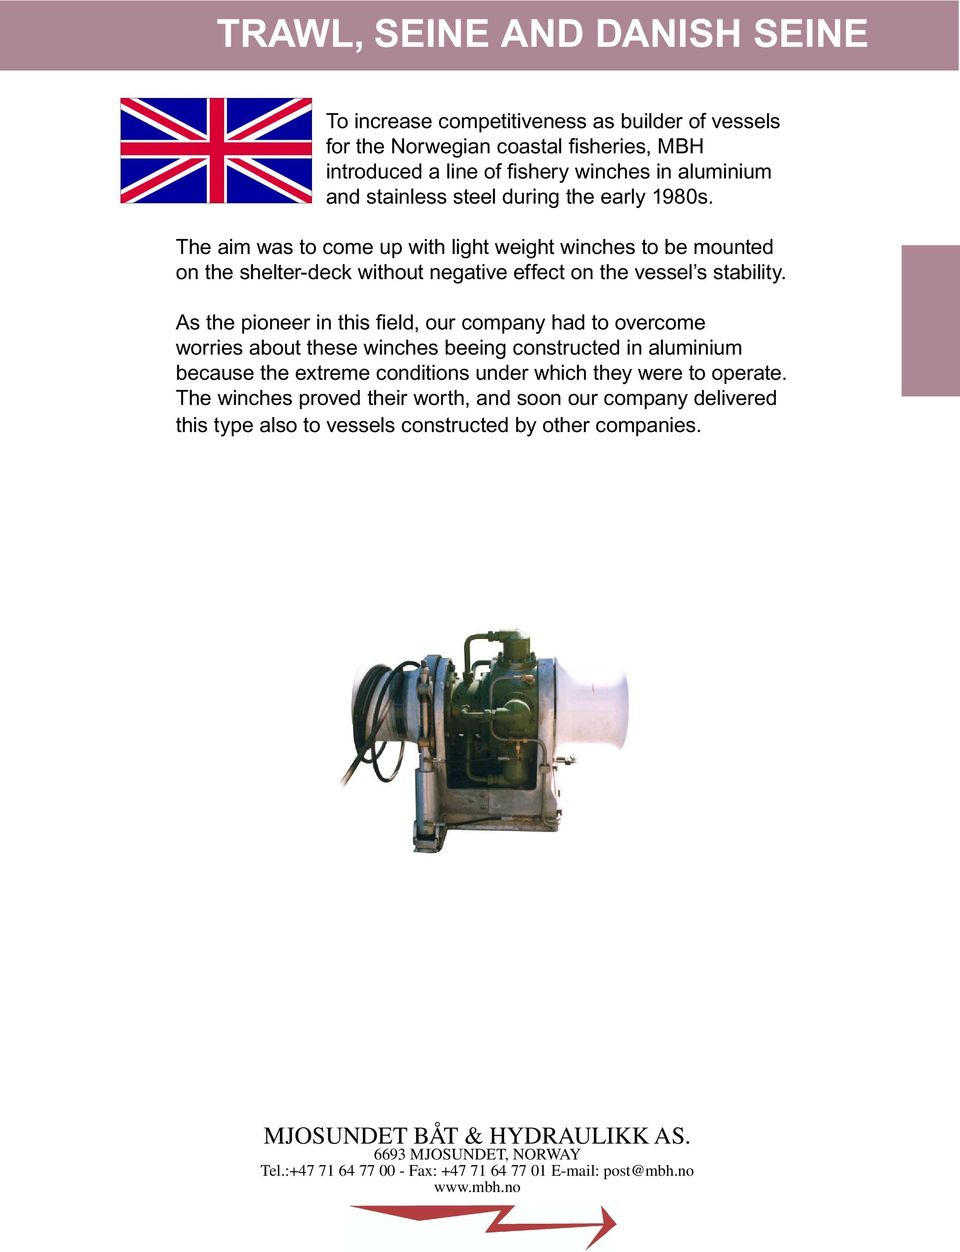 As the pioneer in this field, our company had to overcome worries about these winches beeing constructed in aluminium because the extreme conditions under which they were to operate.